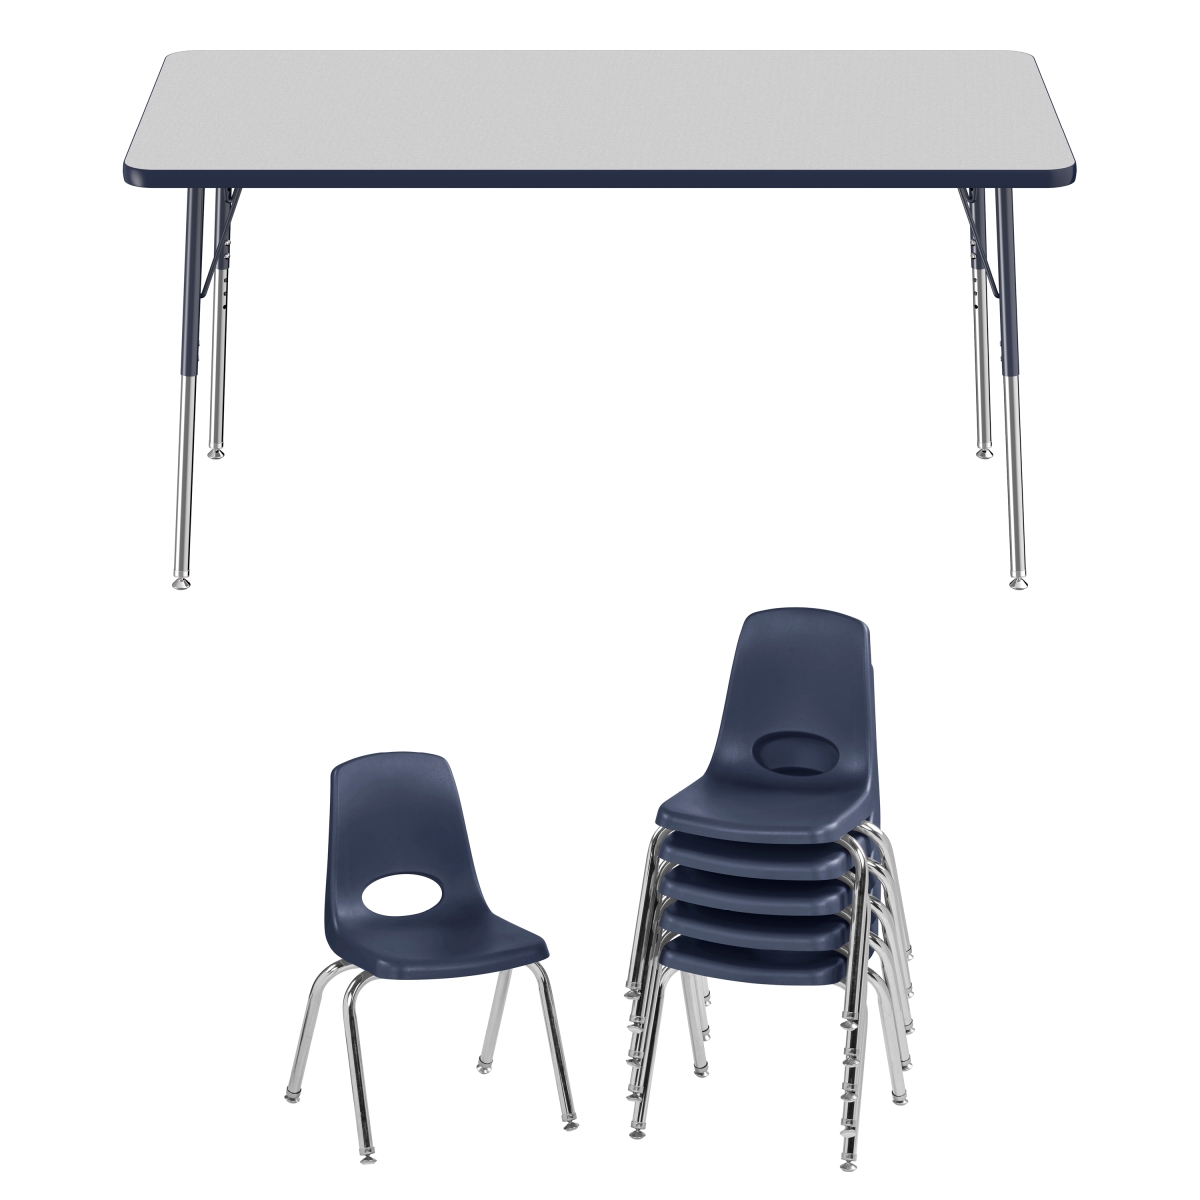 10304-gynv 30 X 60 In. Rectangle T-mold Adjustable Activity Table Standard Swivel With 6 Stack Chairs 14 In. Swivel Glide - Grey & Navy